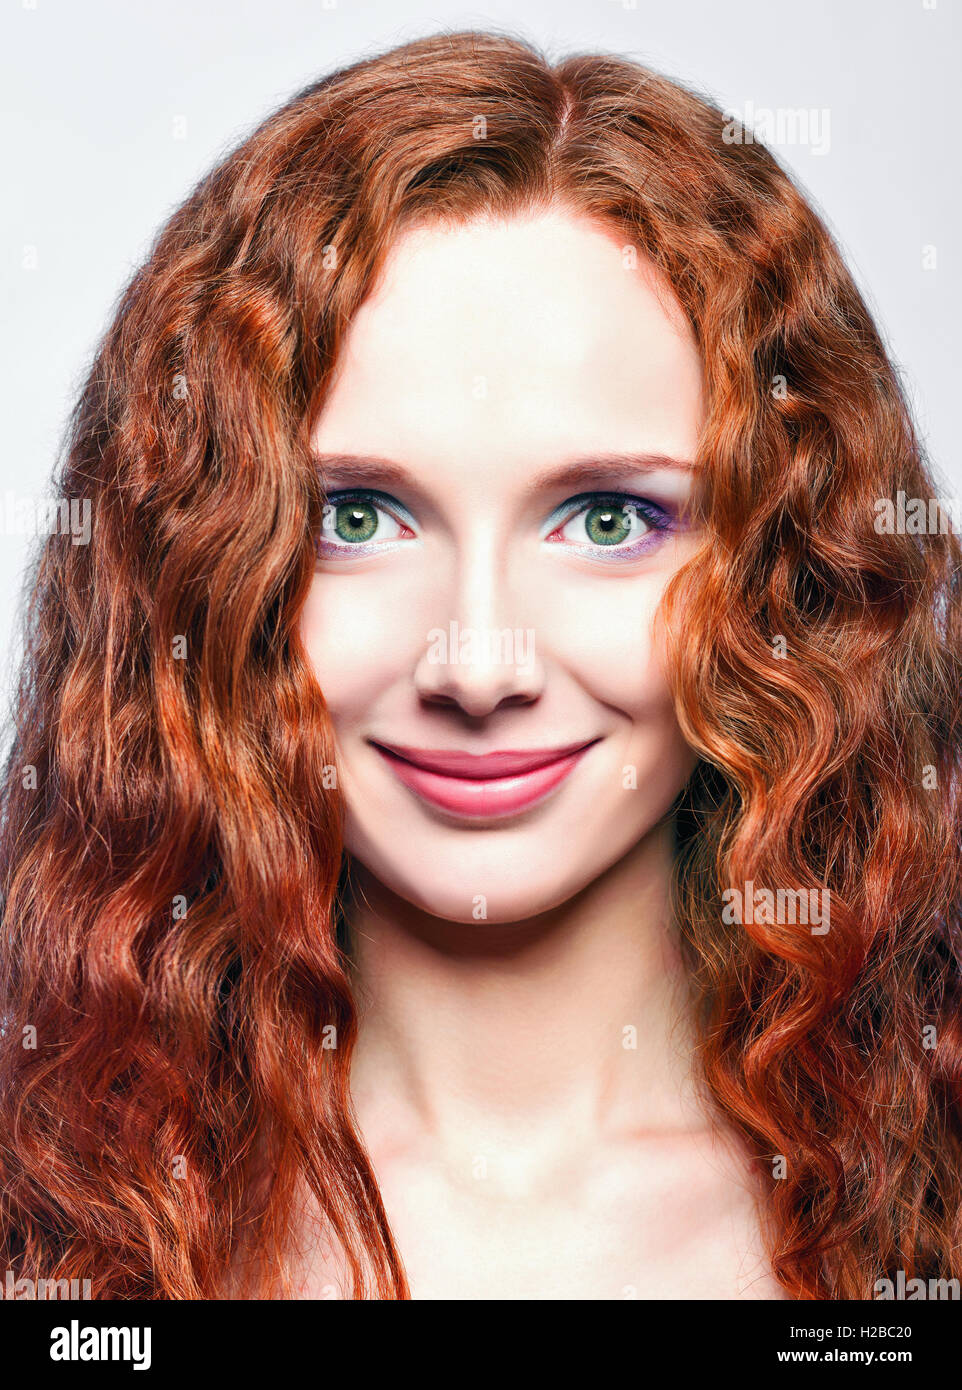 Closeup portrait of beautiful smiling redhead girl Banque D'Images